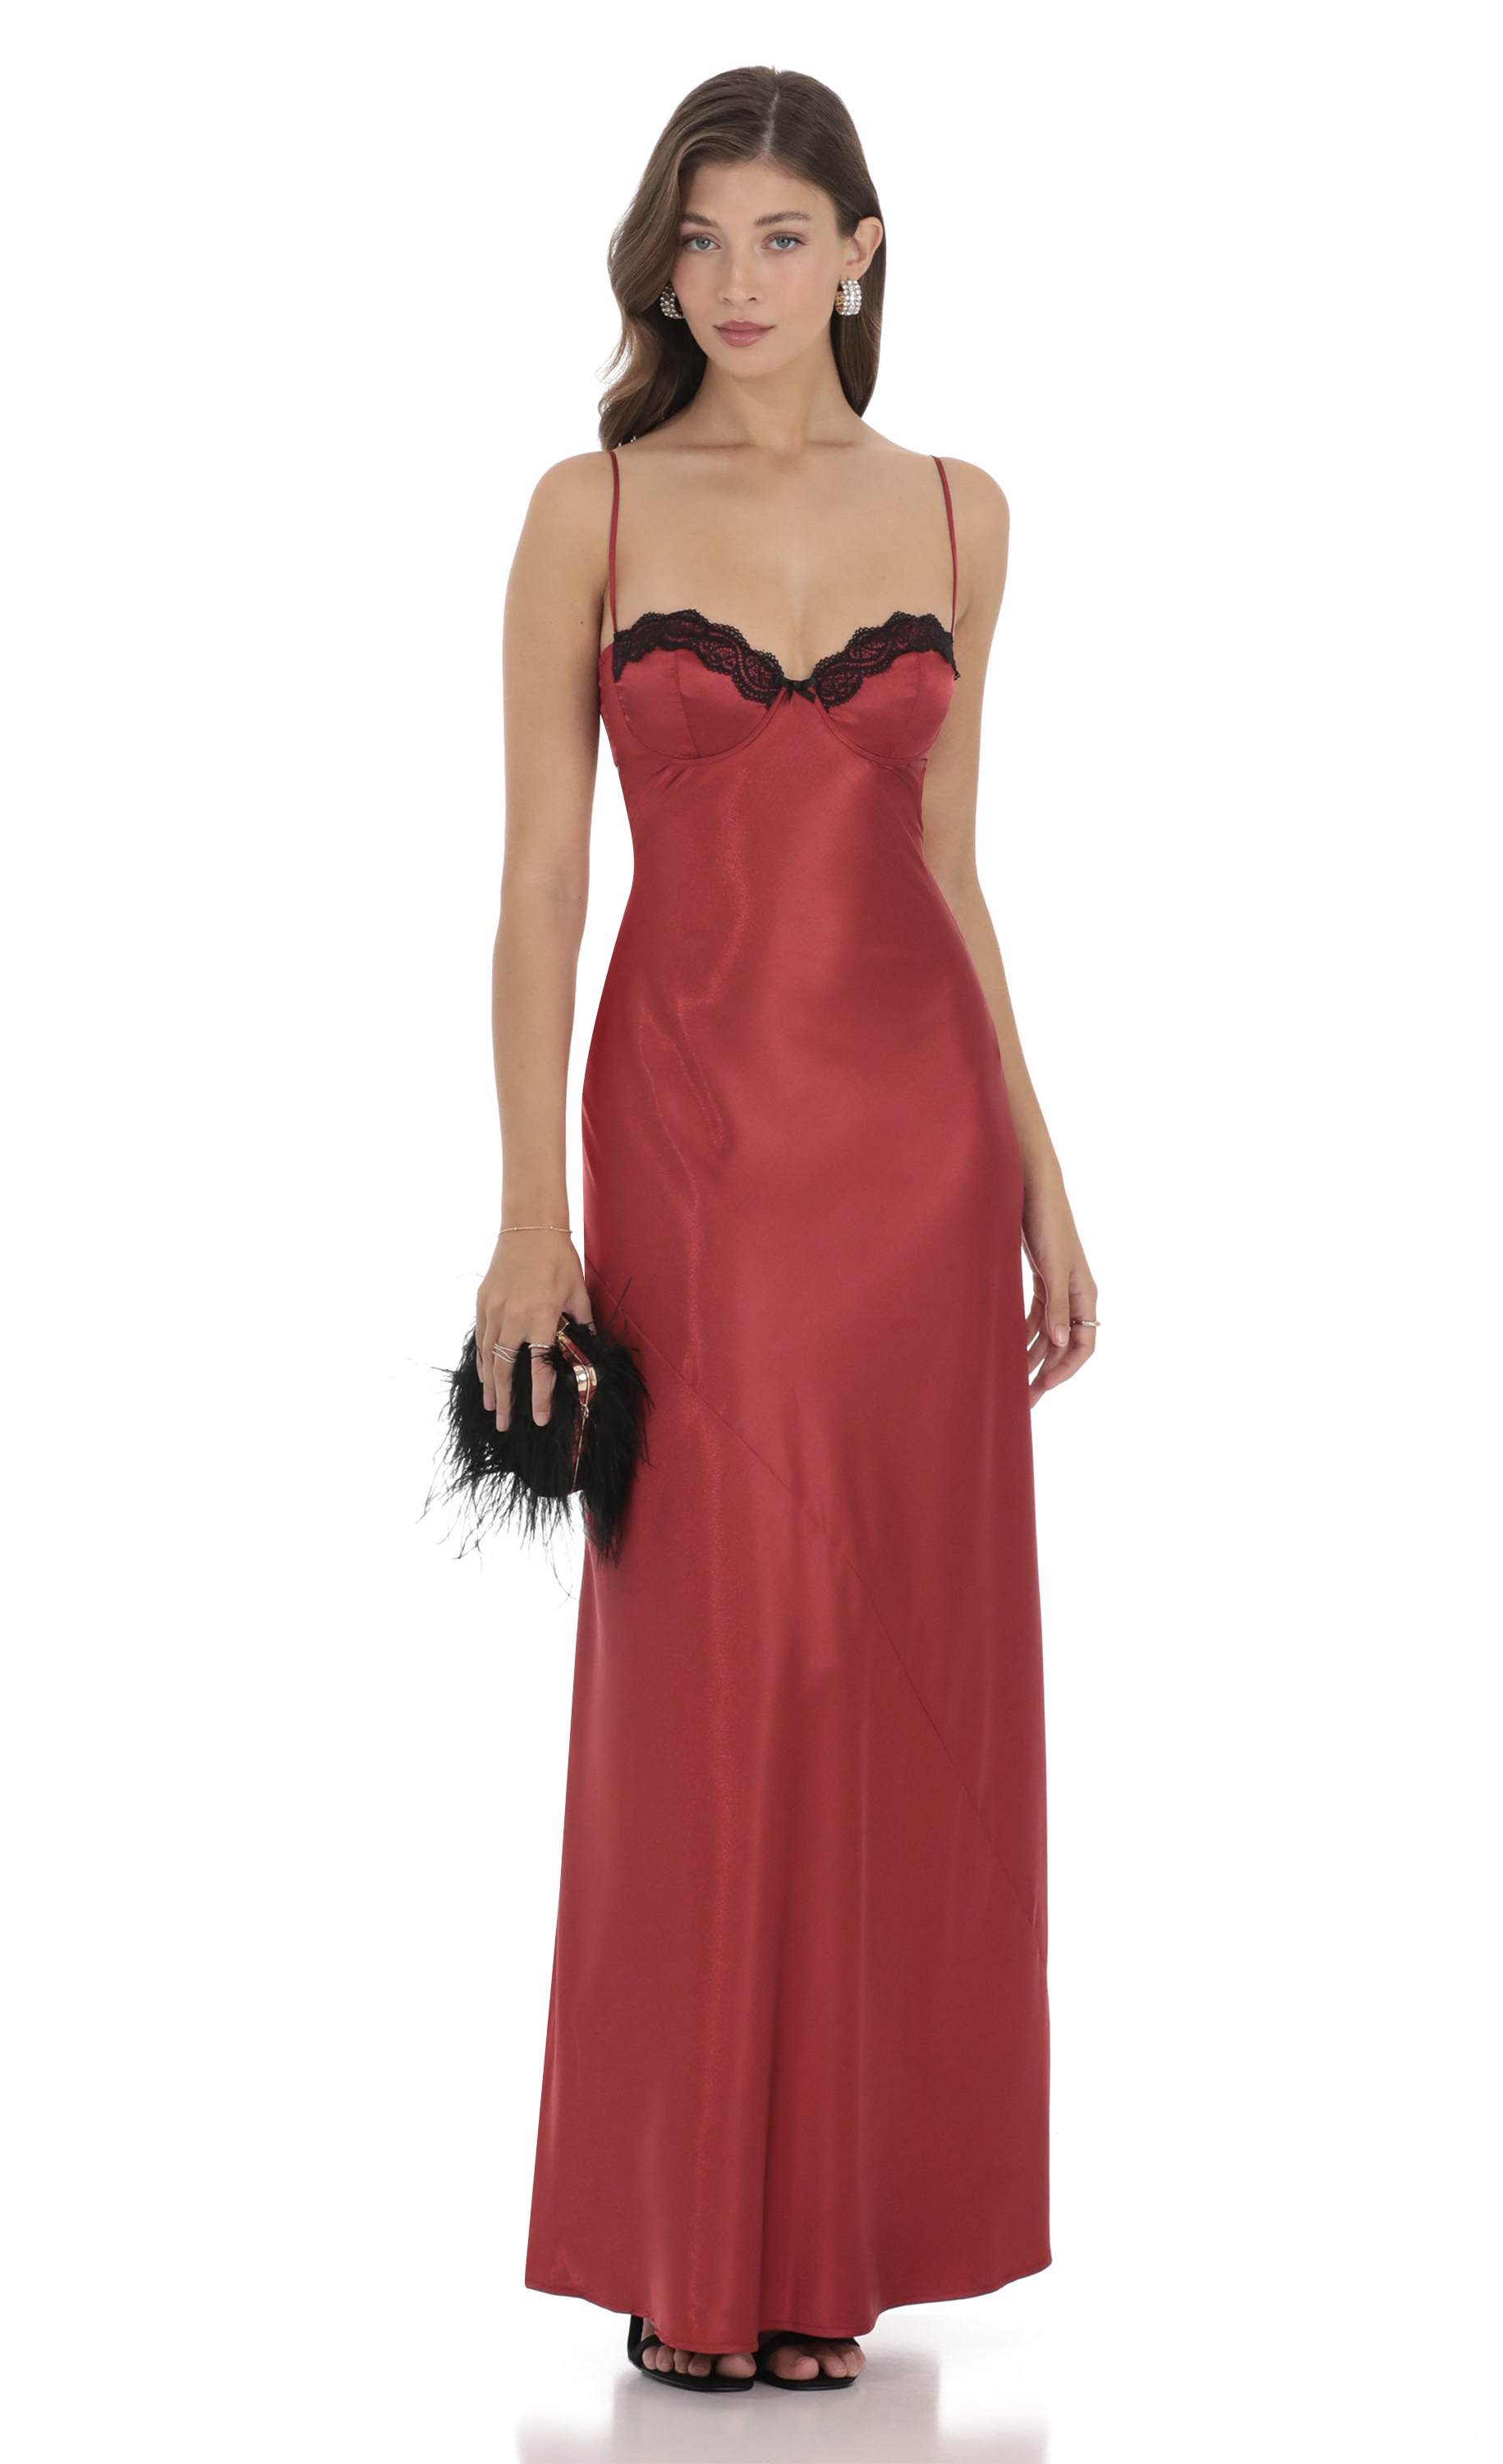 Satin Lace Open Back Maxi Dress in Red